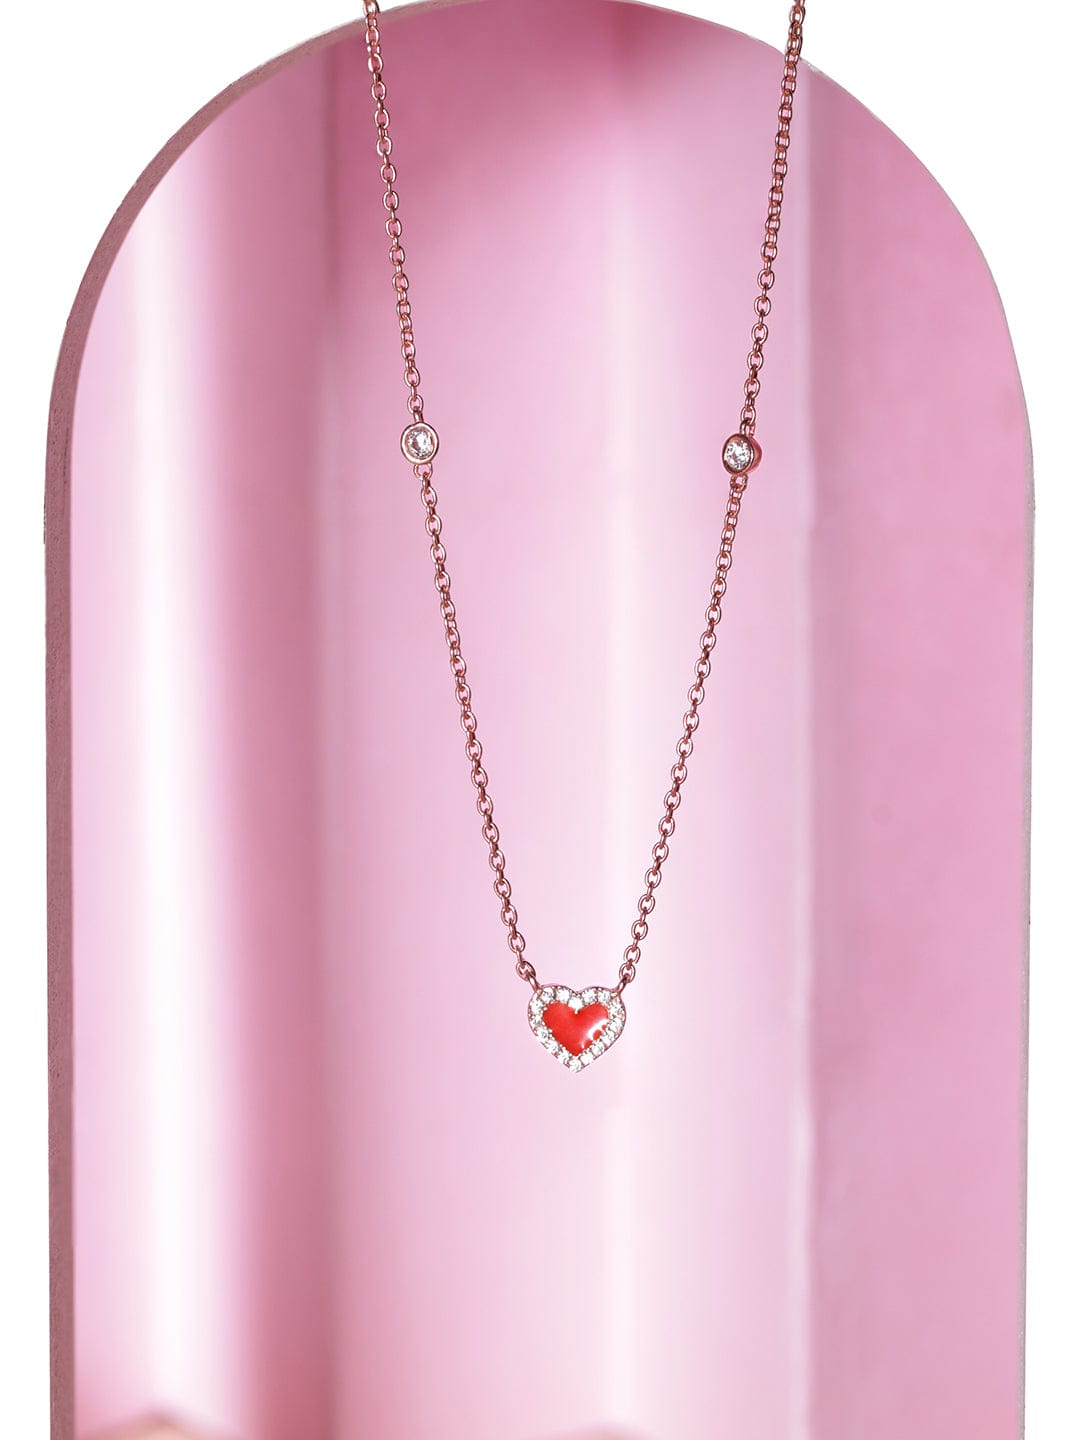 Rubans 925 Silver 18K Rose Gold Plated Red Heart Studded Charm Necklace Necklaces, Necklace Sets, Chains & Mangalsutra